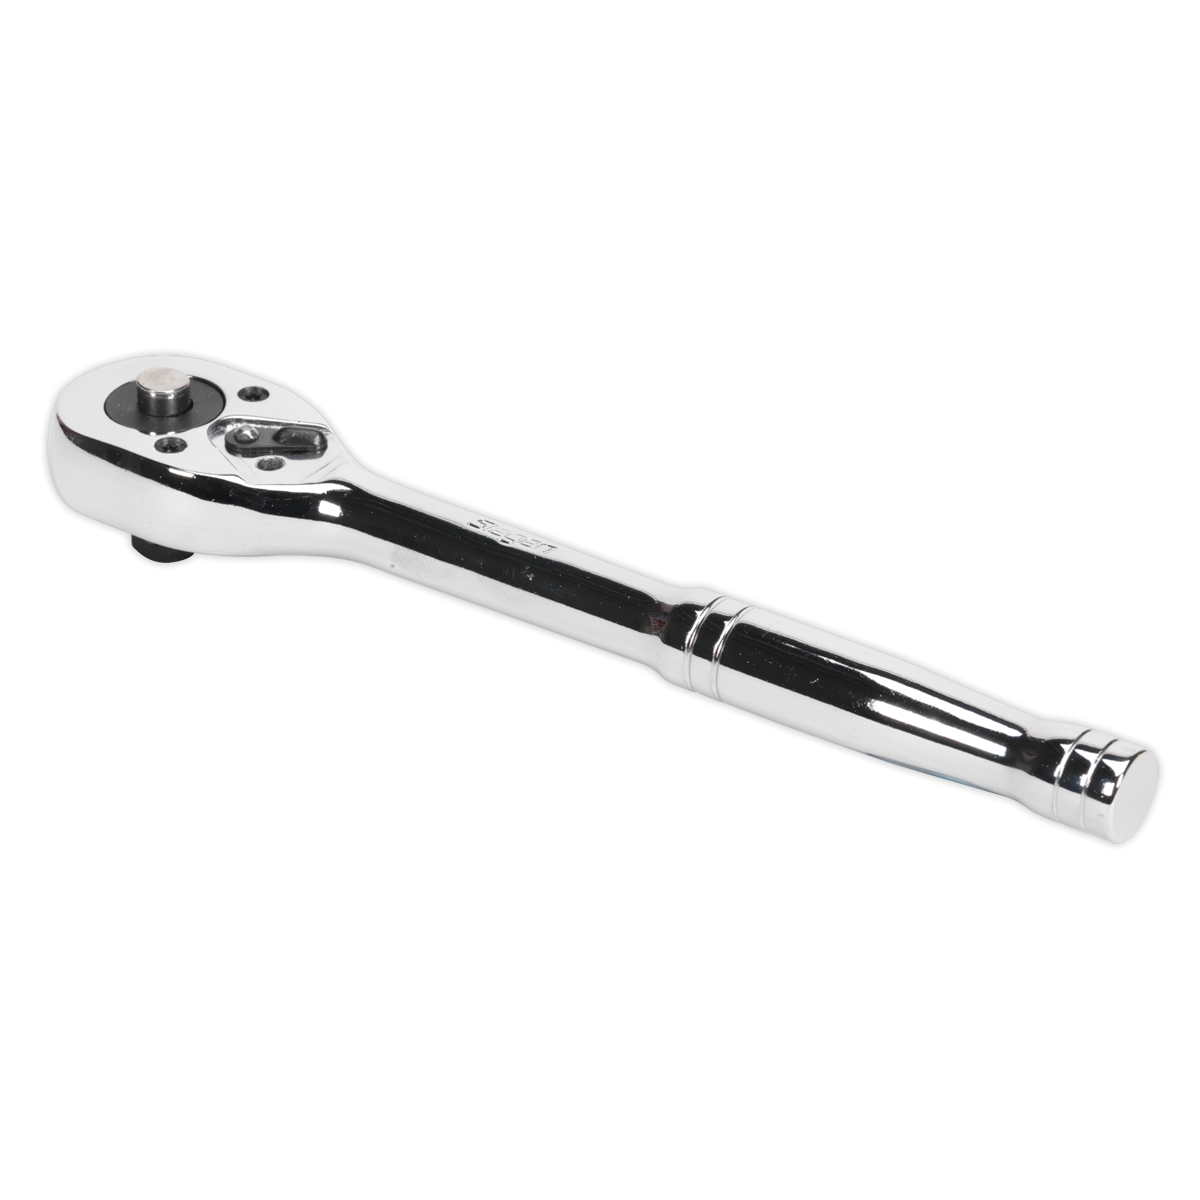 Sealey-Sealey-S0705-Ratchet-Wrench-with-Pear-Head-Flip-Reverse,-3/8"-Square-Drive,-Silver-S0705